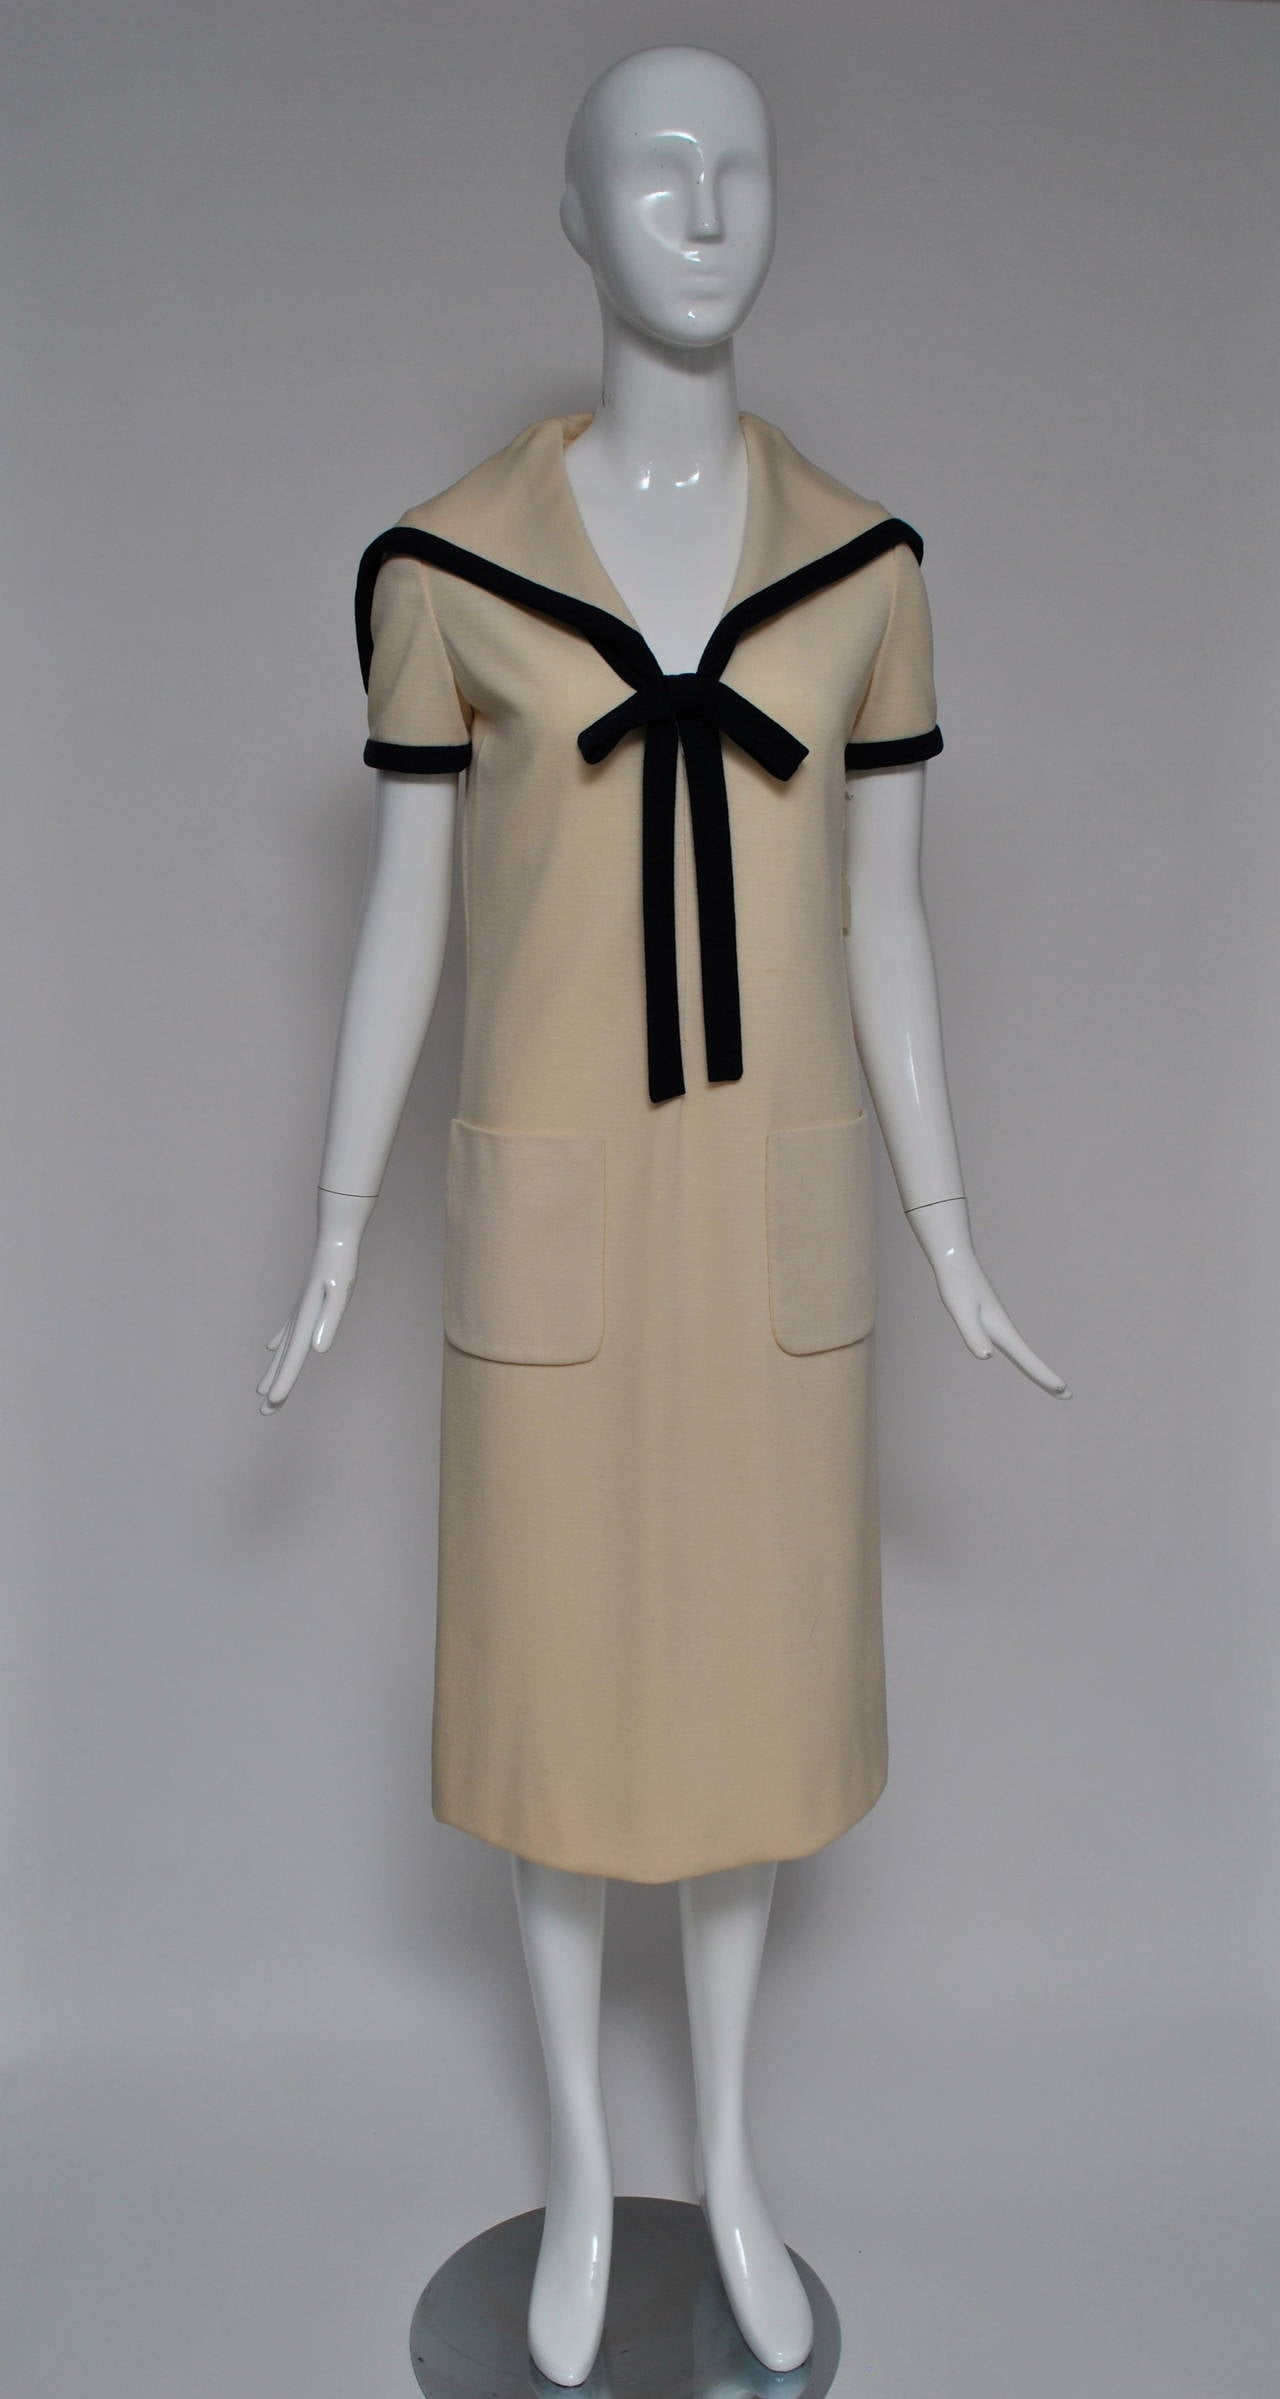 Bill Blass early 1970s sailor dress in white knit with square-back collar trimmed in navy, navy stars on back and navy tie with bow that hooks under collar. Front zipper. Patch pockets. Lined in silk.